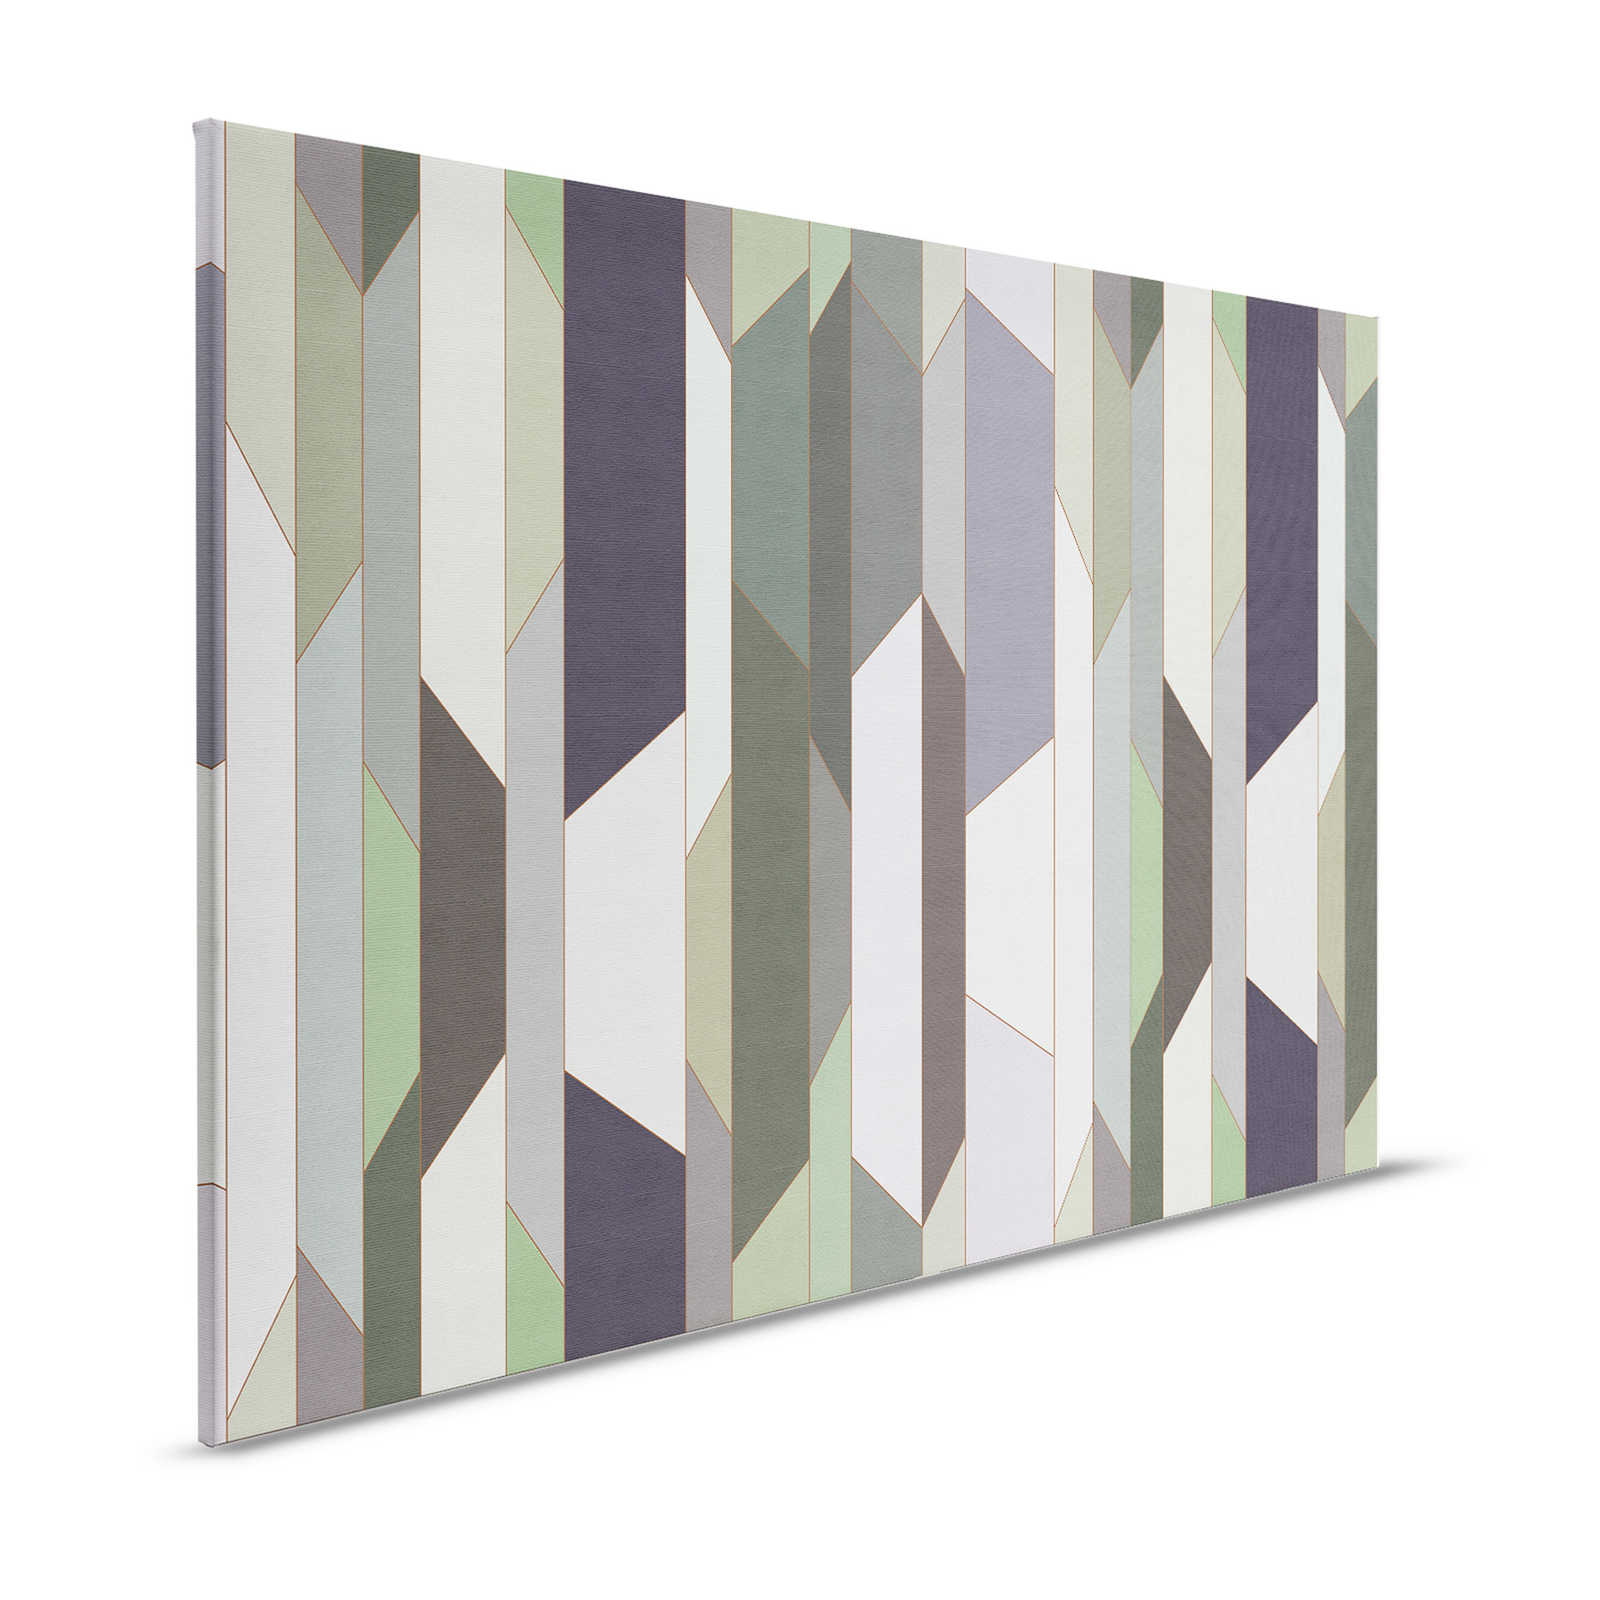 Fold 1 - Canvas painting with retro style stripe design - 1.20 m x 0.80 m
